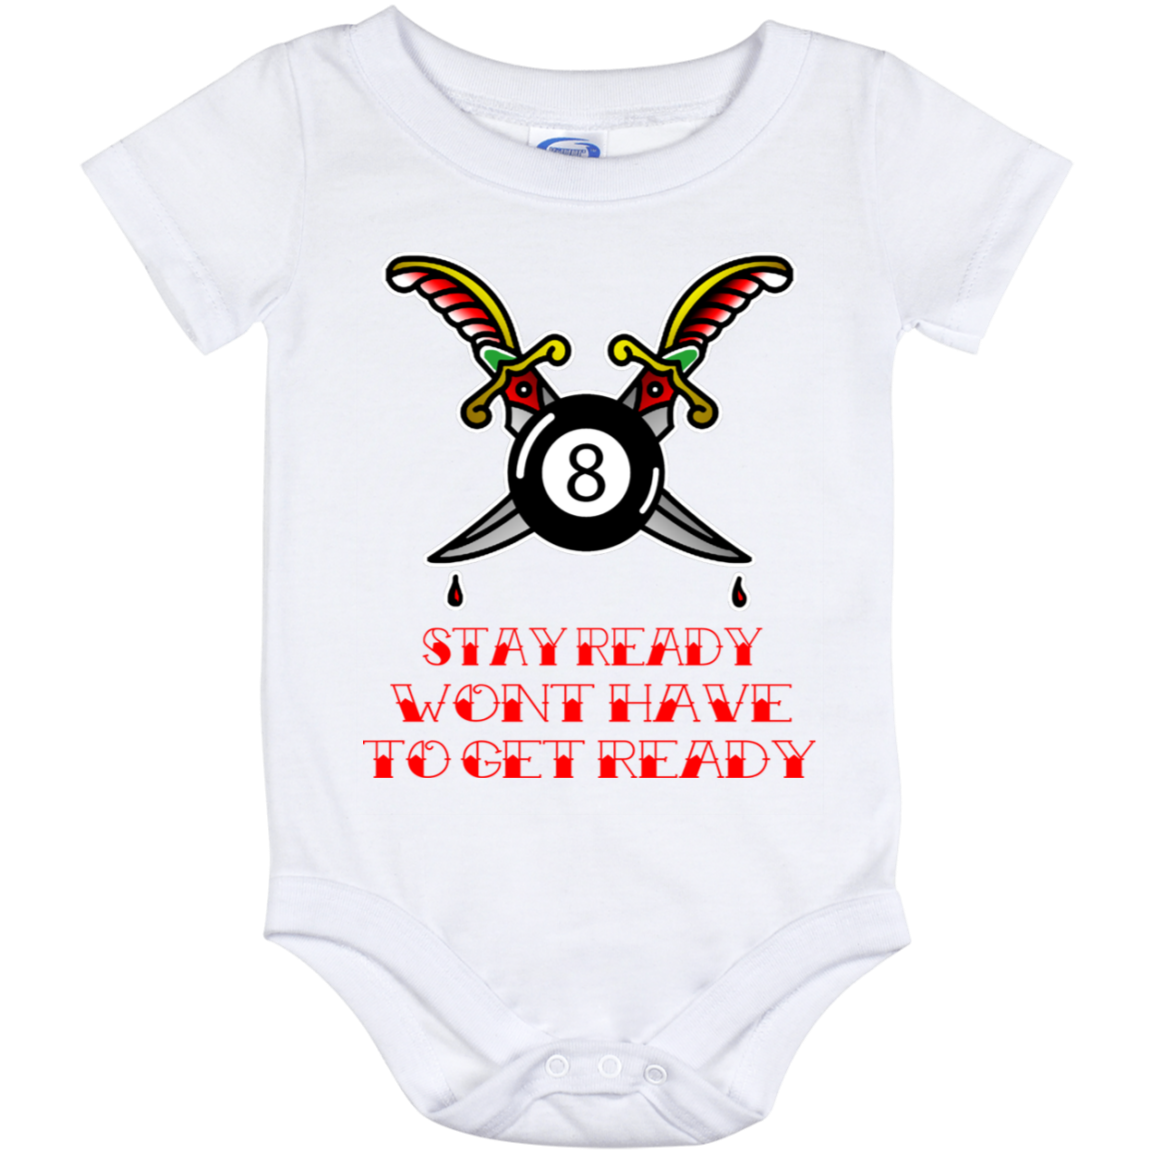 The GHOATS Custom Design #36. Stay Ready Won't Have to Get Ready. Tattoo Style. Ver. 1/2. Baby Onesie 12 Month